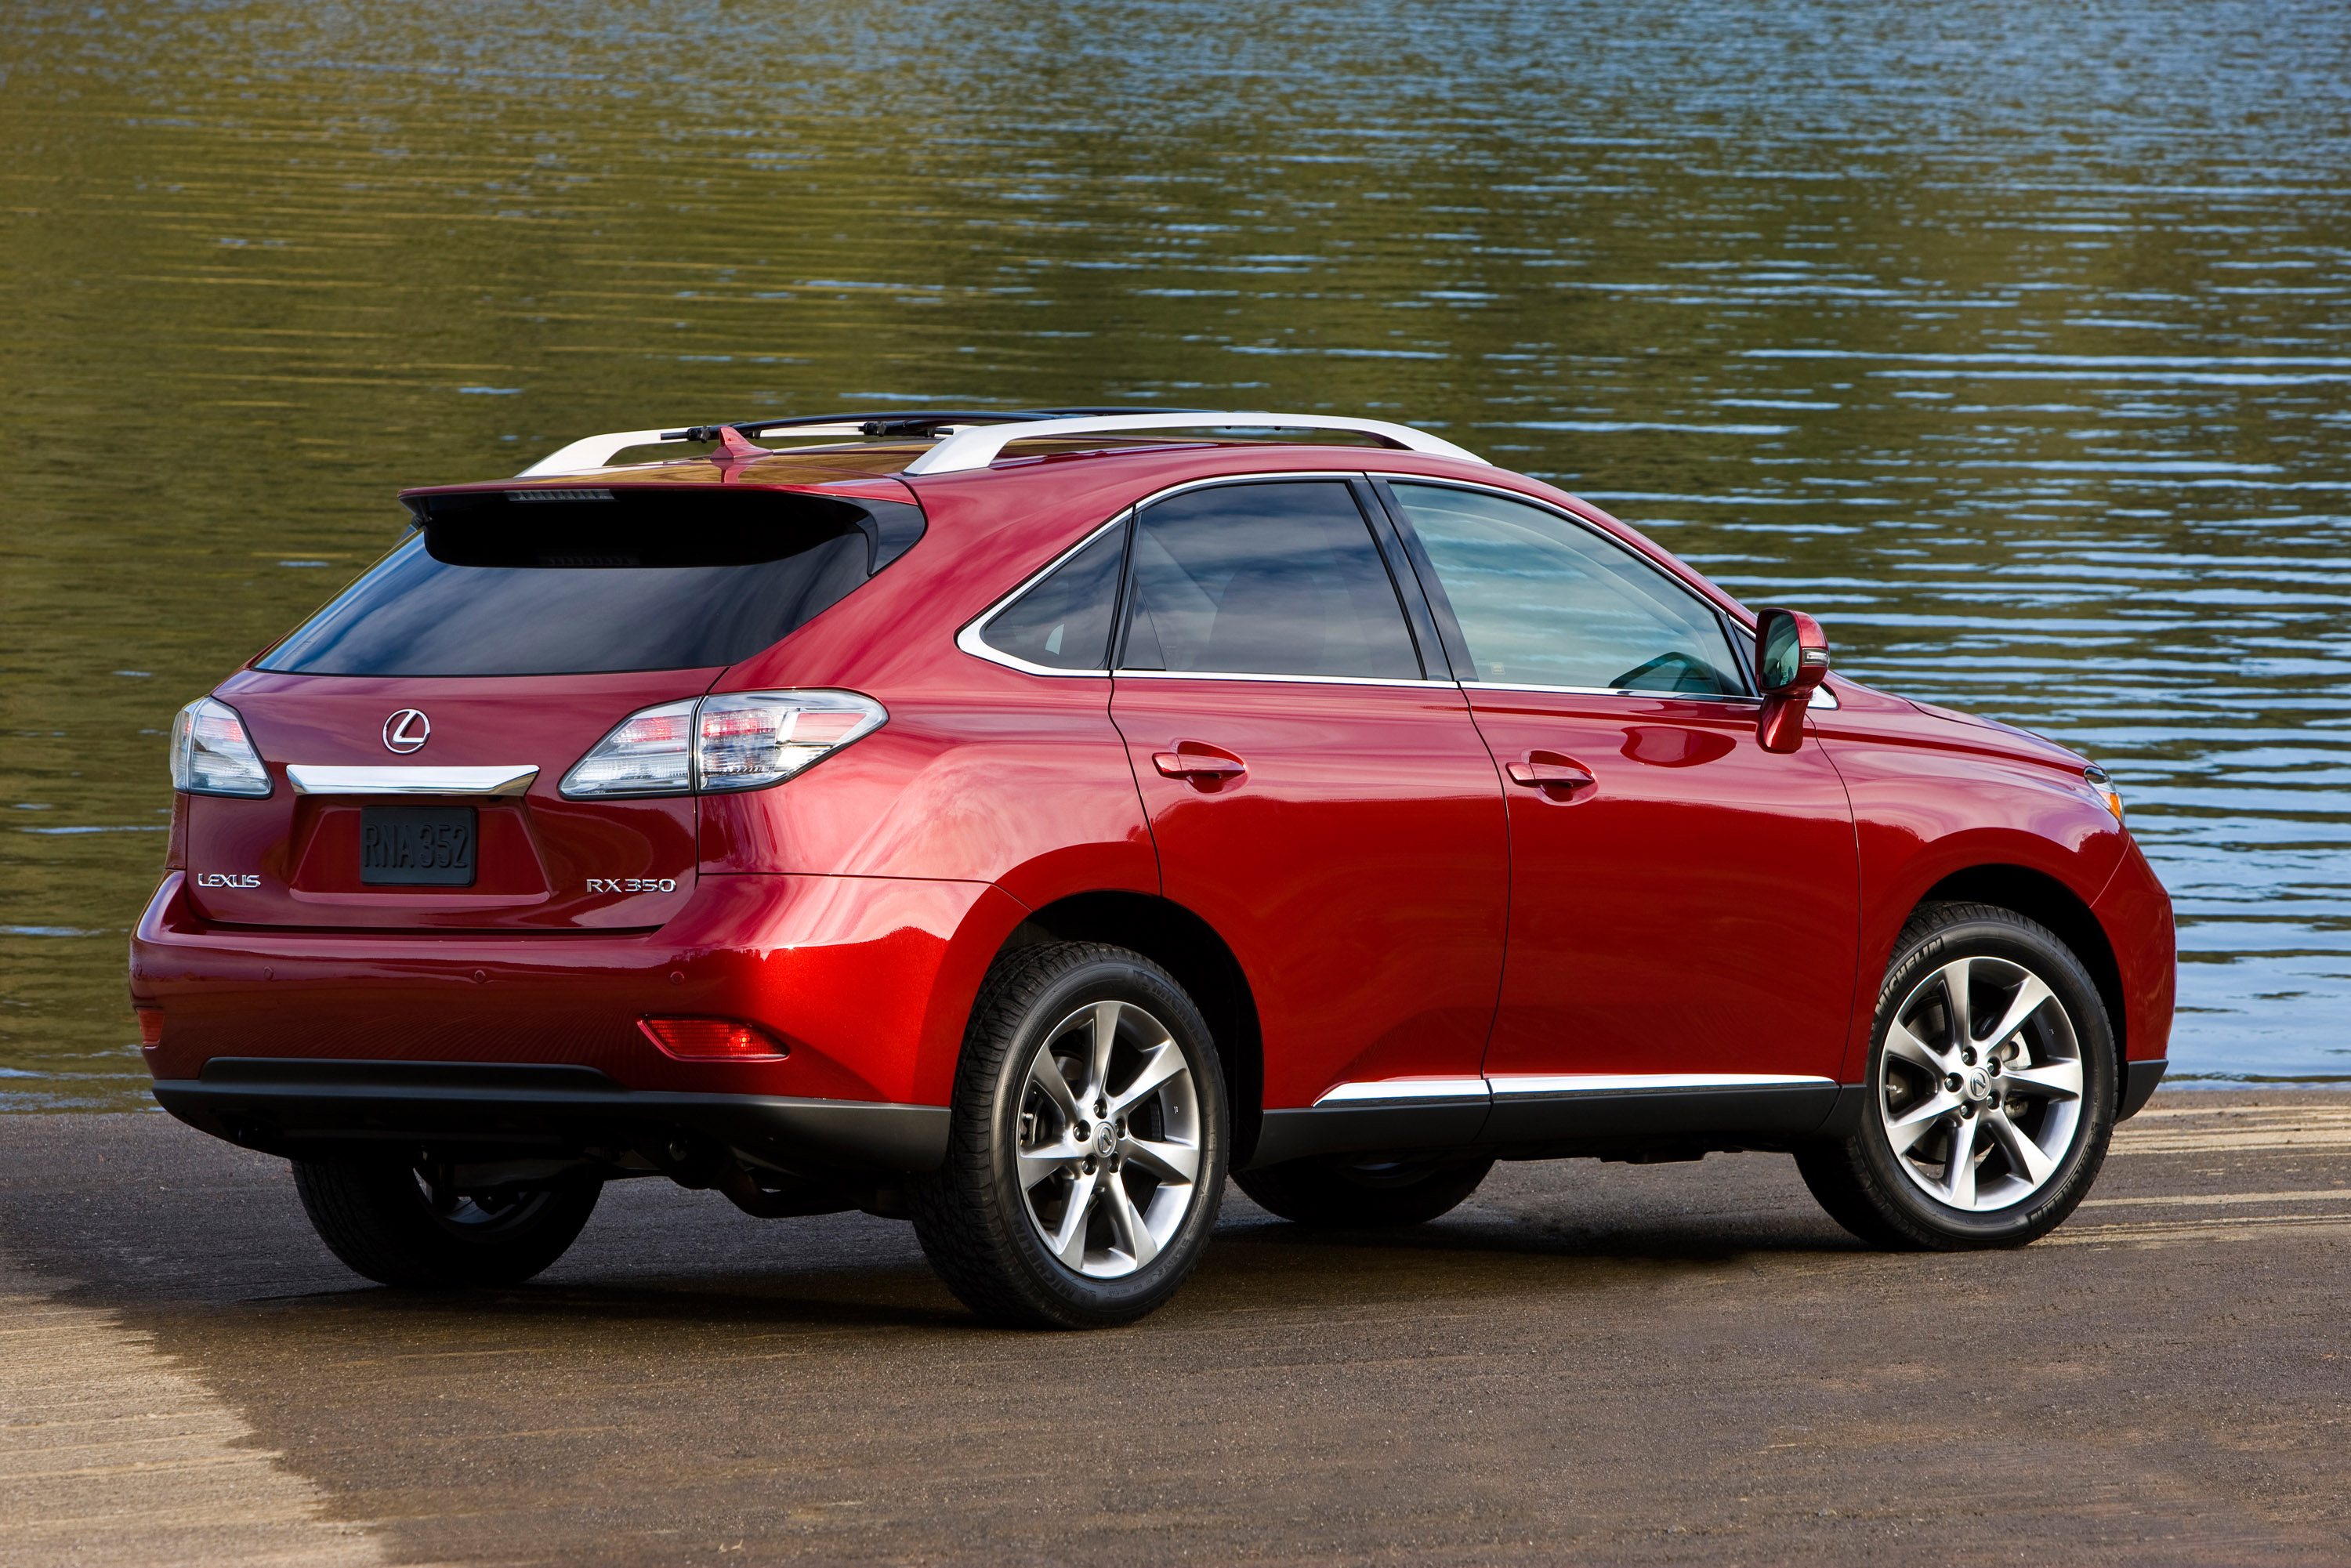 Lexus Announces Pricing for All-New 2010 RX 350